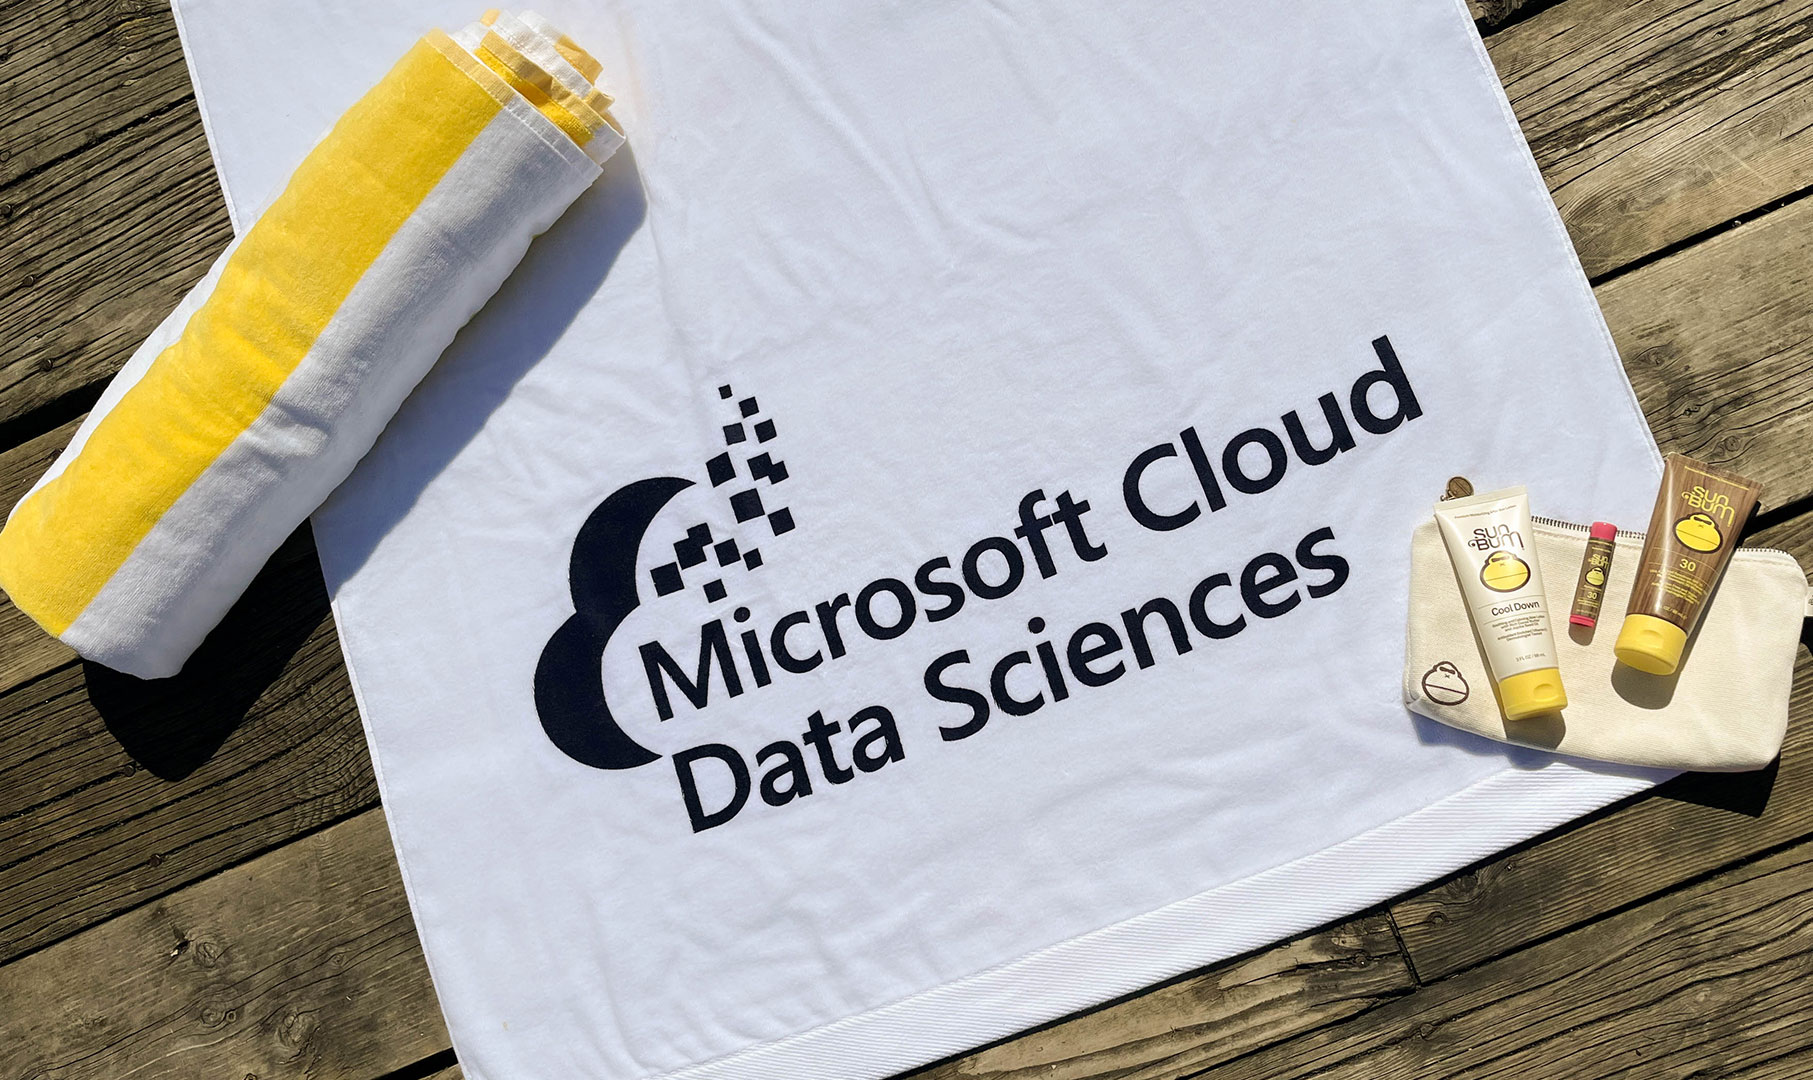 Image of white beach towel with Microsoft Cloud Data Sciences logo